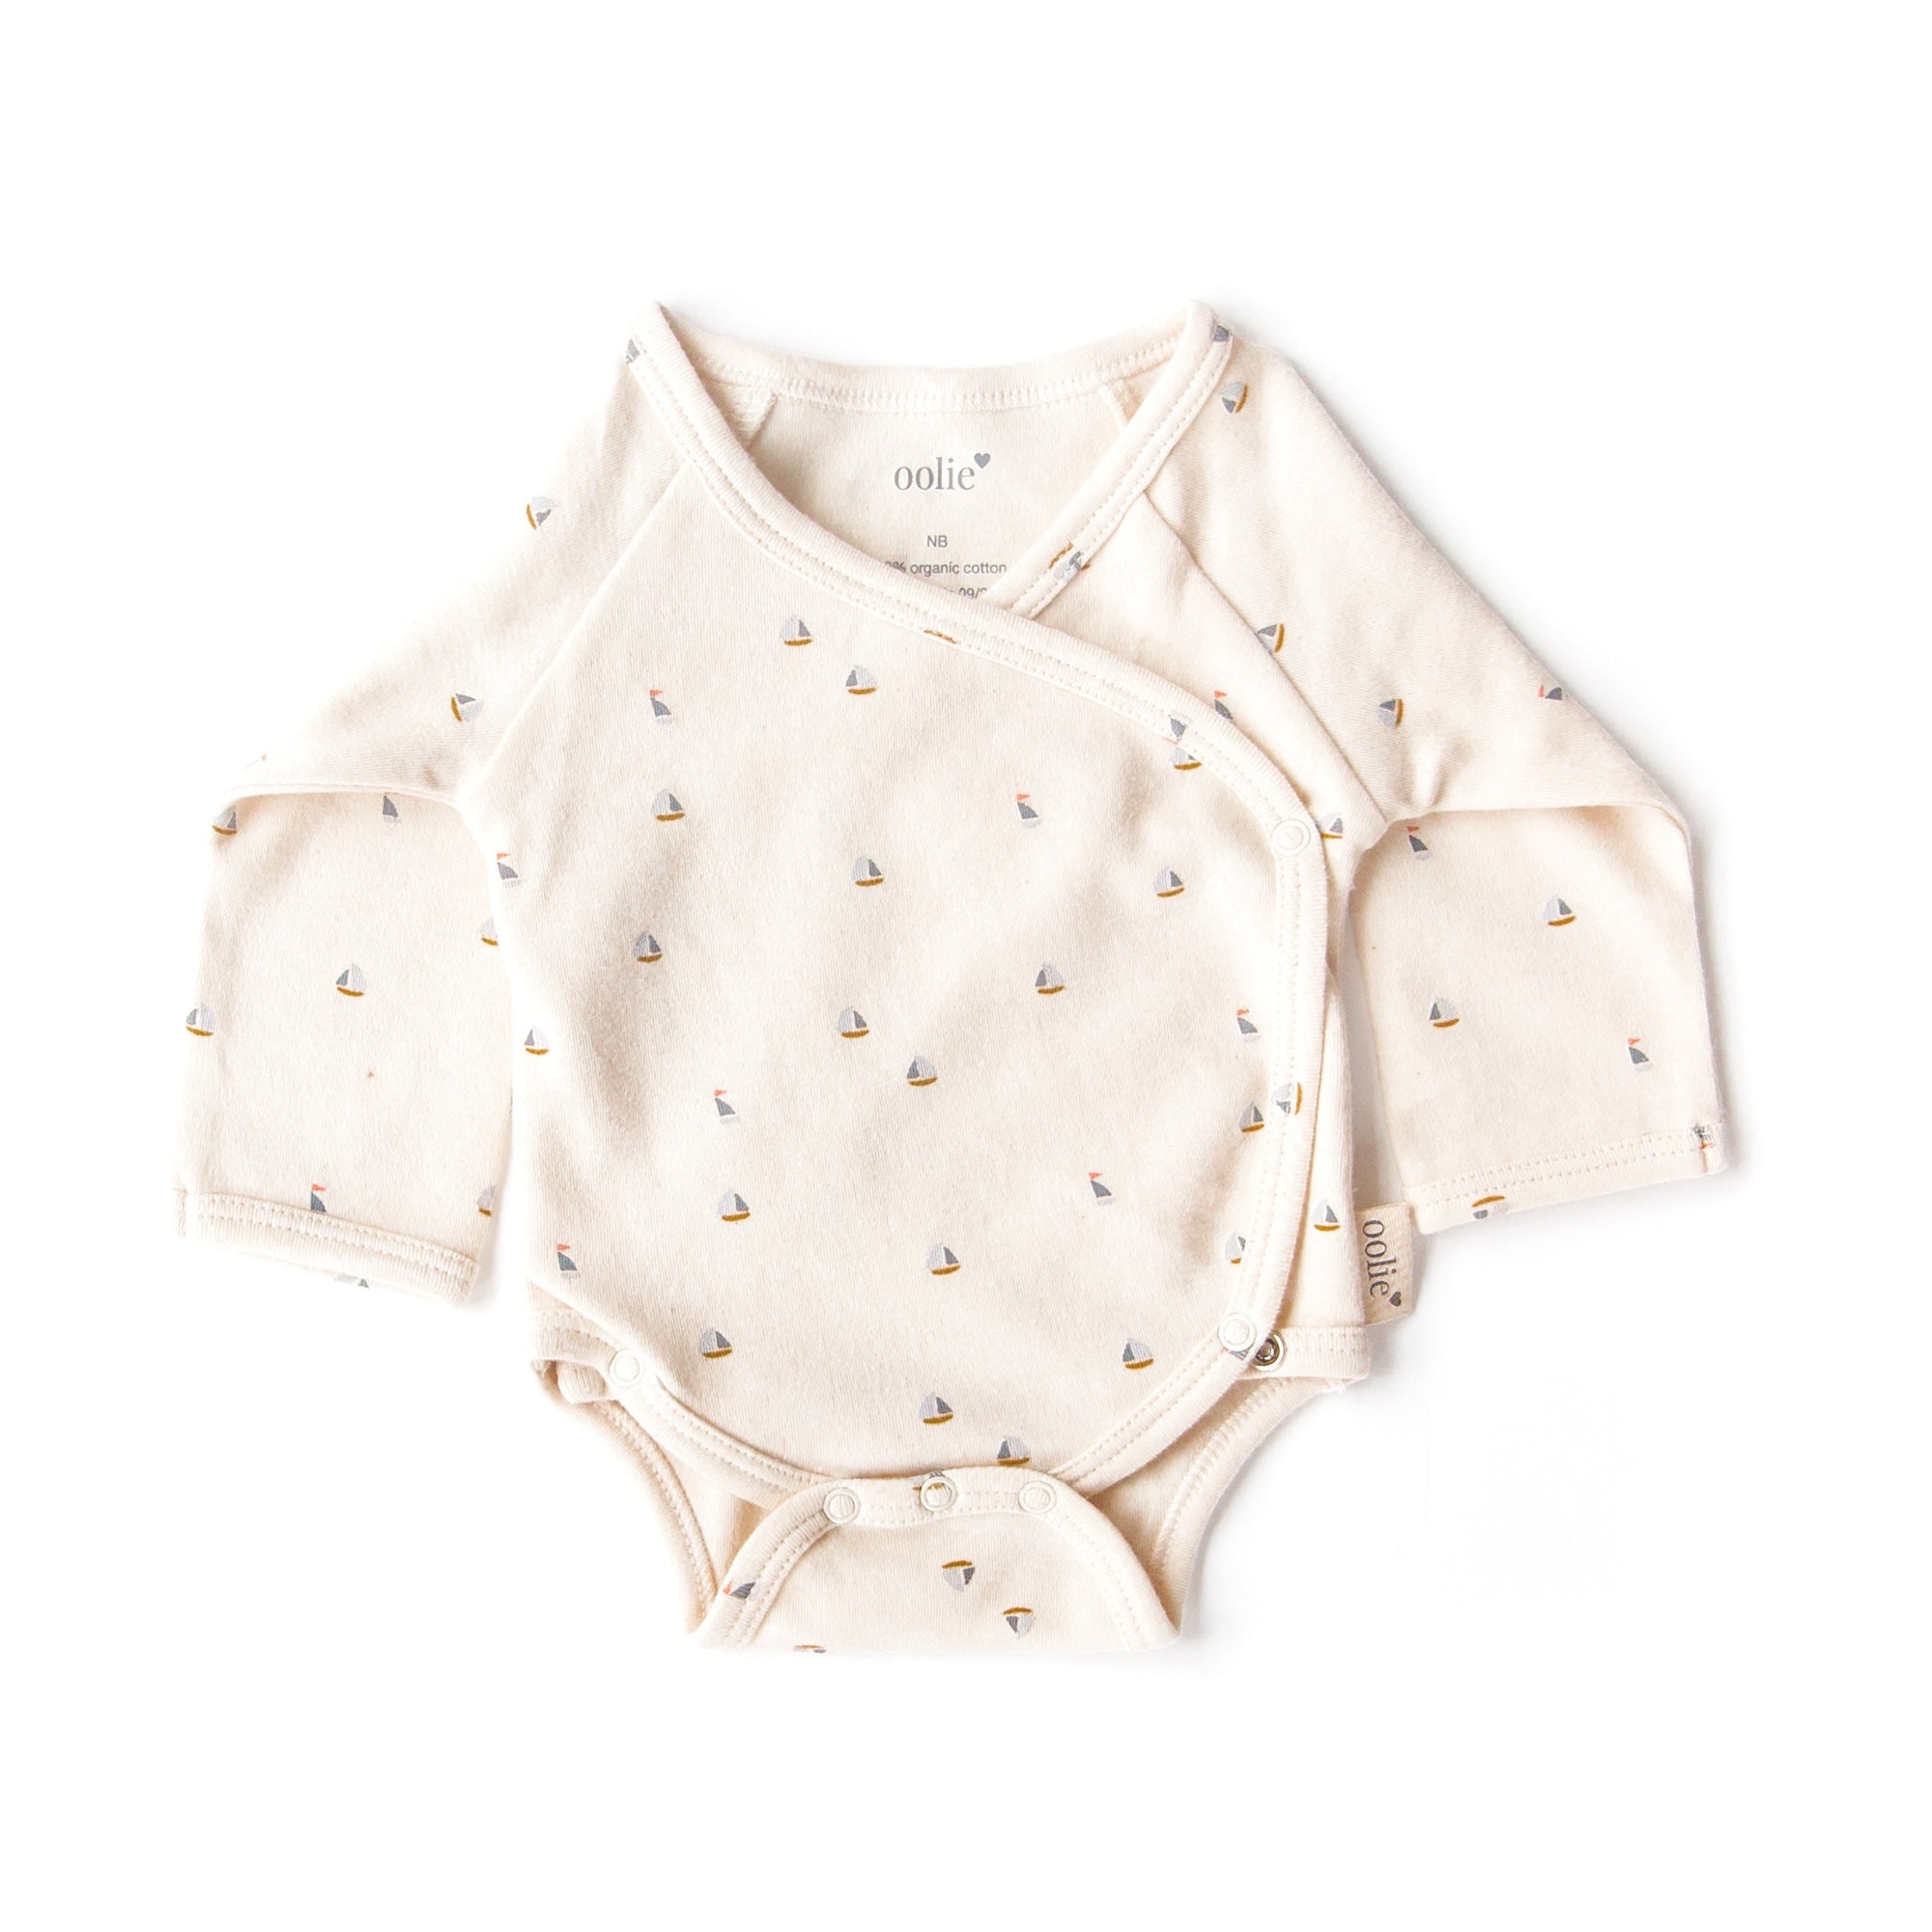 An Oolie organic cotton onesie with the schooner print, a natural color with small sailboats in a repeating pattern.